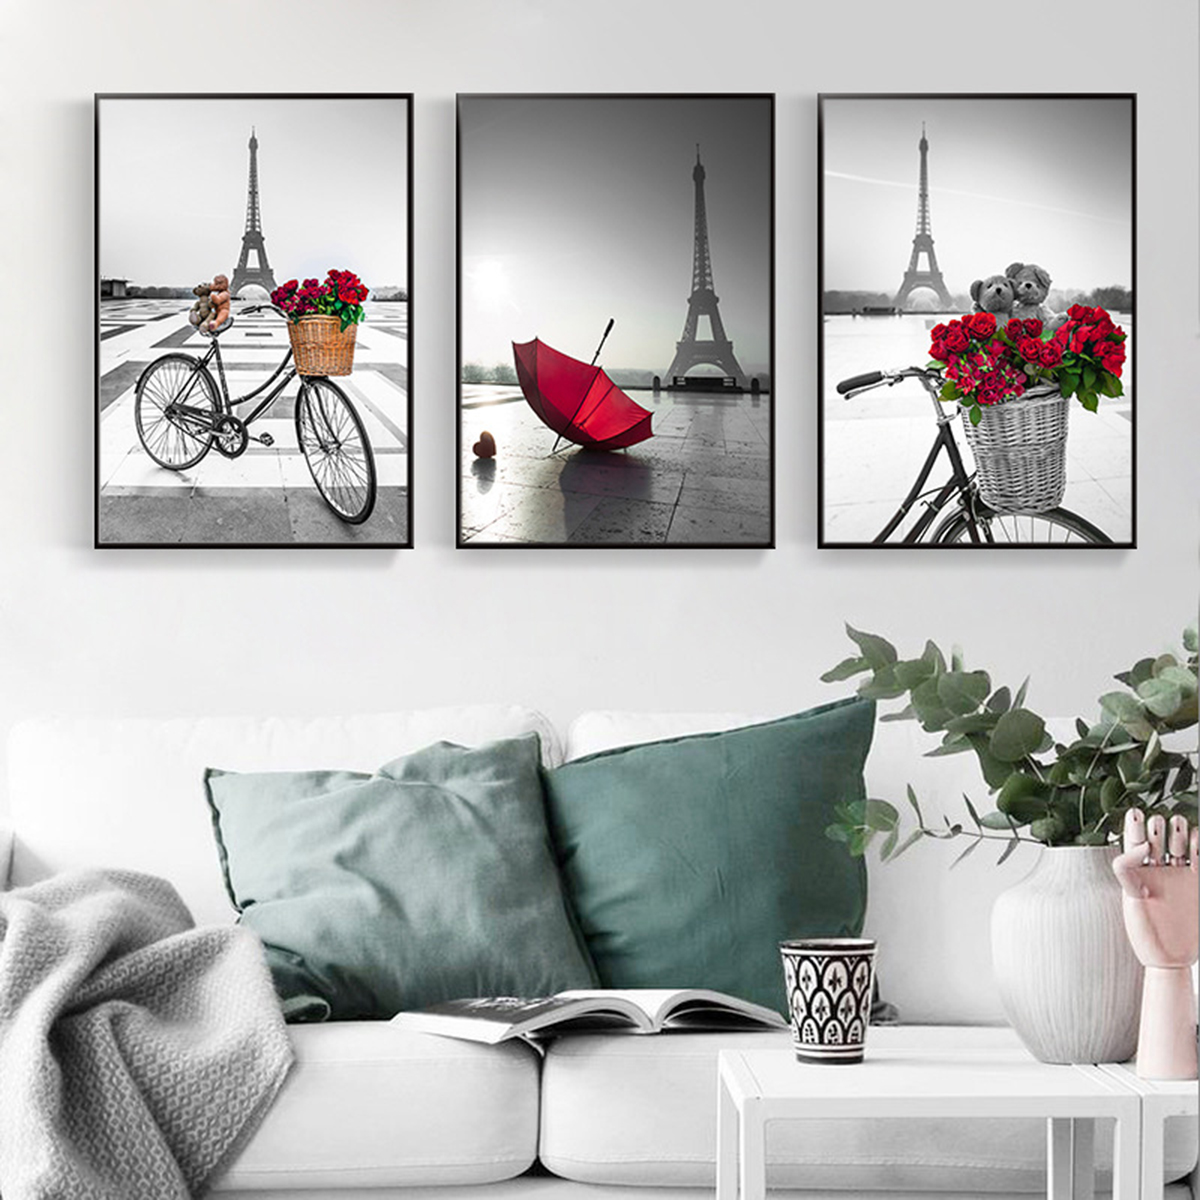 3Pcs-City-Scenery-Canvas-Paintings-Wall-Decorative-Print-Art-Pictures-Unframed-Wall-Hanging-Home-Off-1783981-8